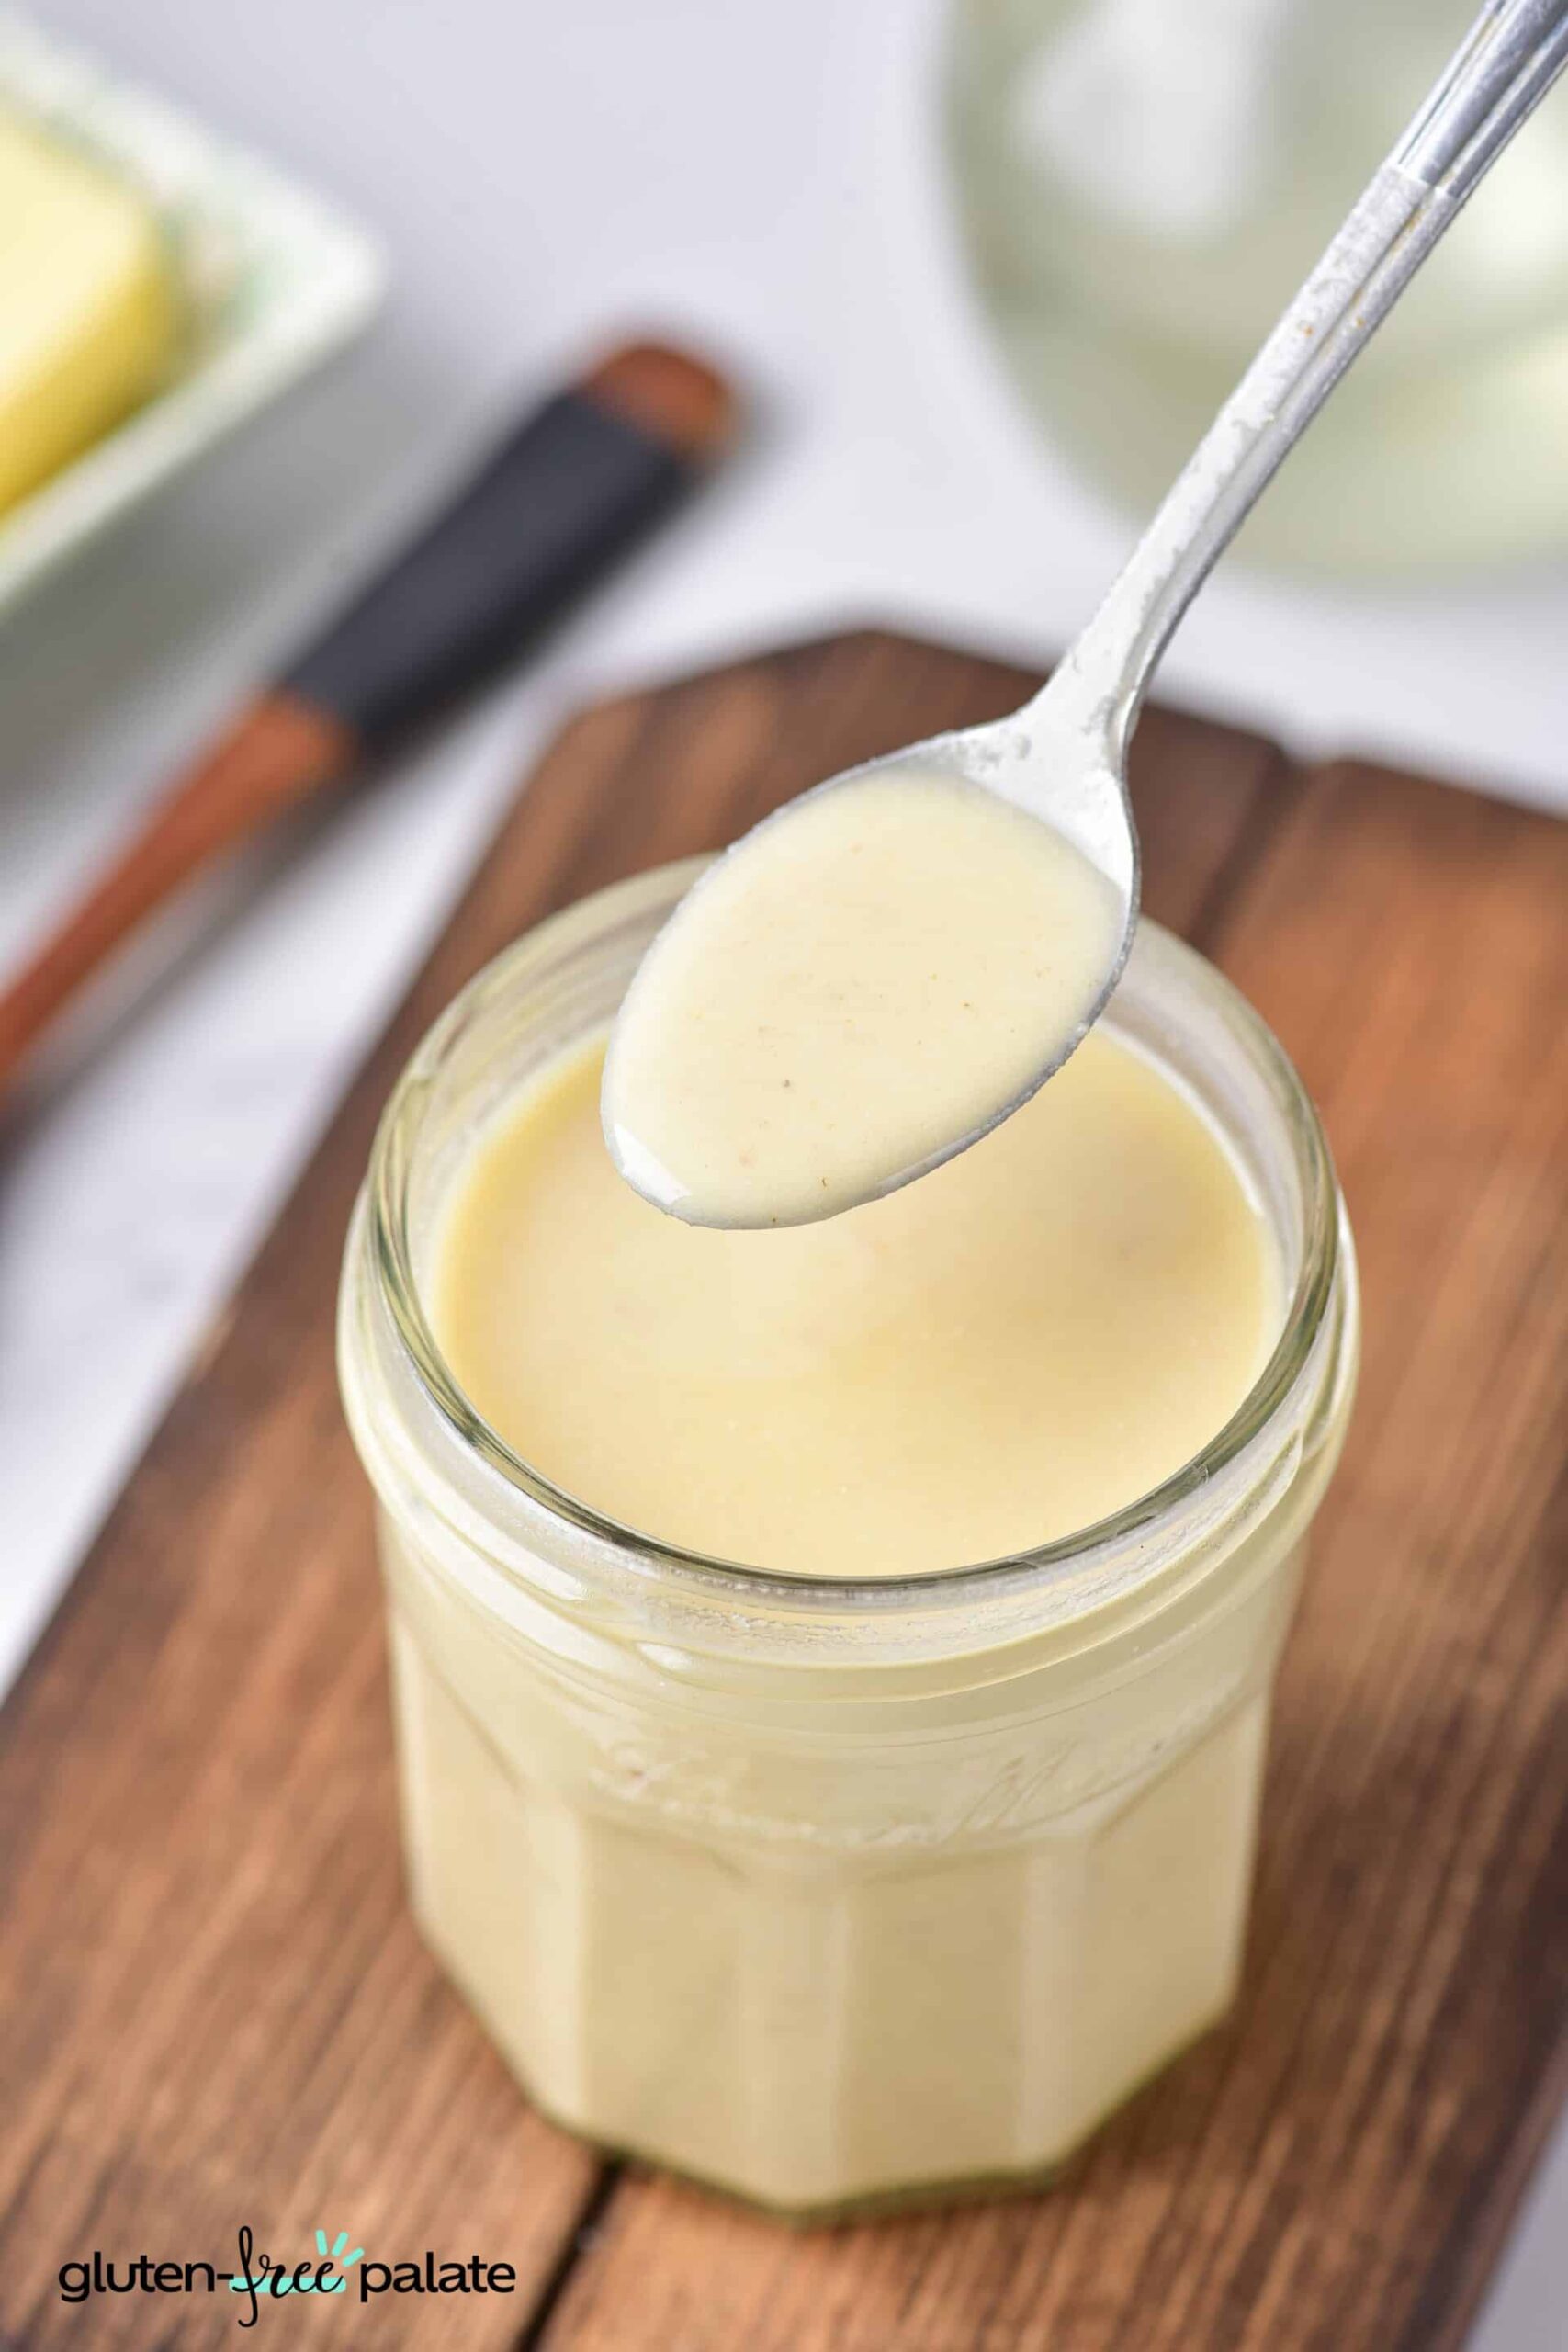 gluten-free roux in a jar and a silver spoon showing the consistency